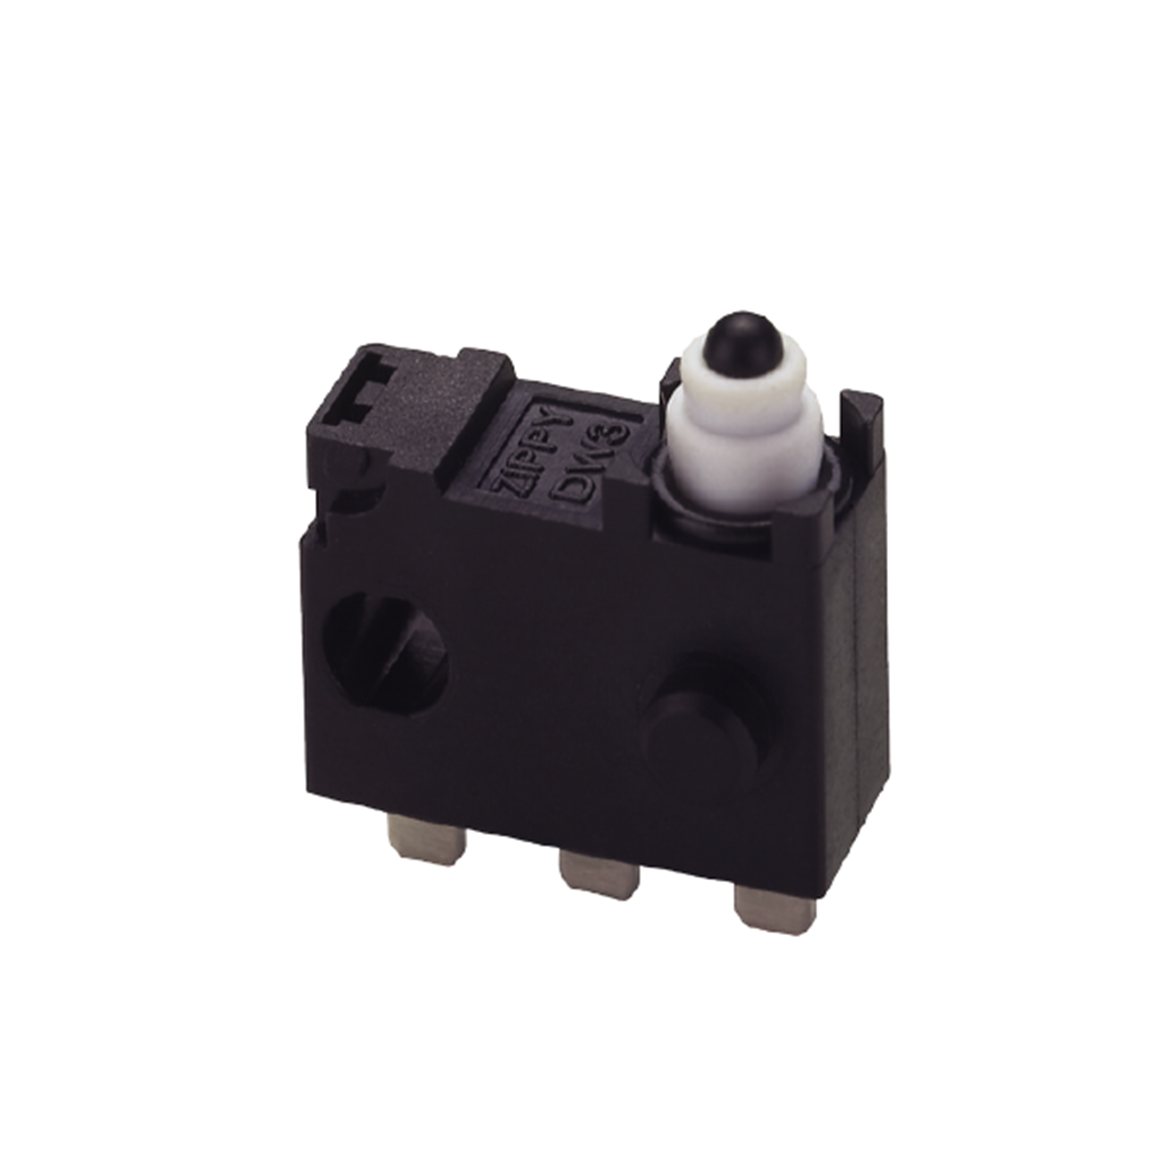 sealed-water-proof-switches-dw3-series-1